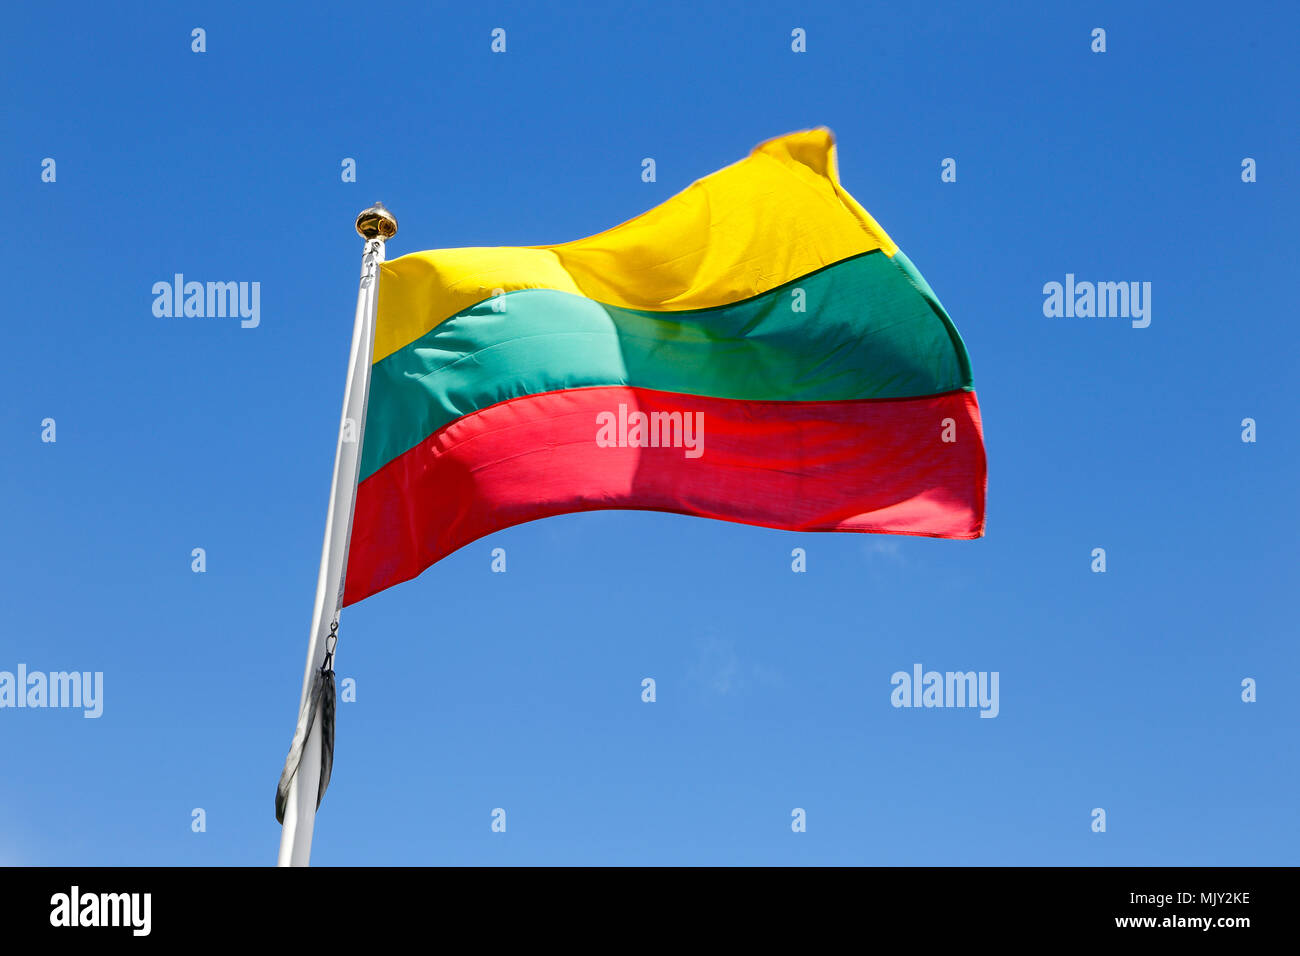 Lithuanian flag waving in thewind on a blue sky. Stock Photo